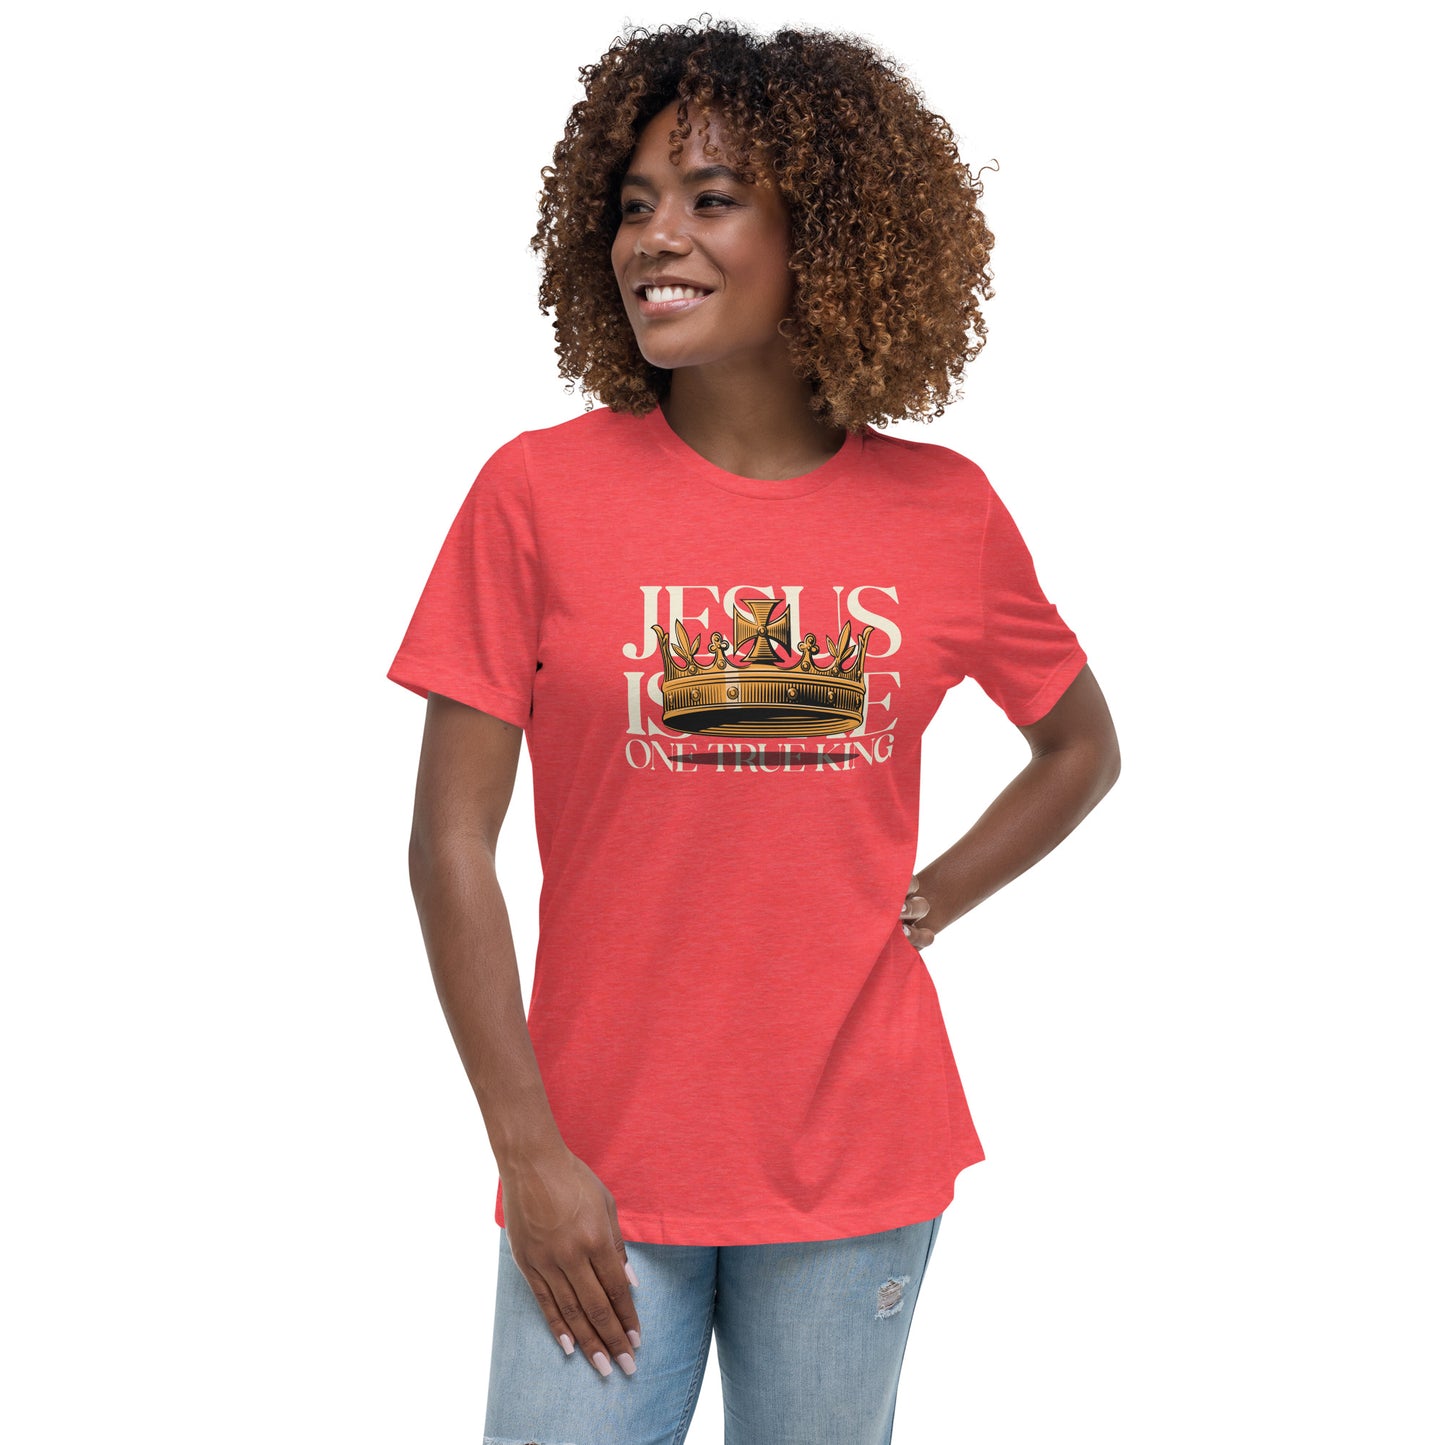 Jesus is the One True King - Women's Relaxed T-Shirt